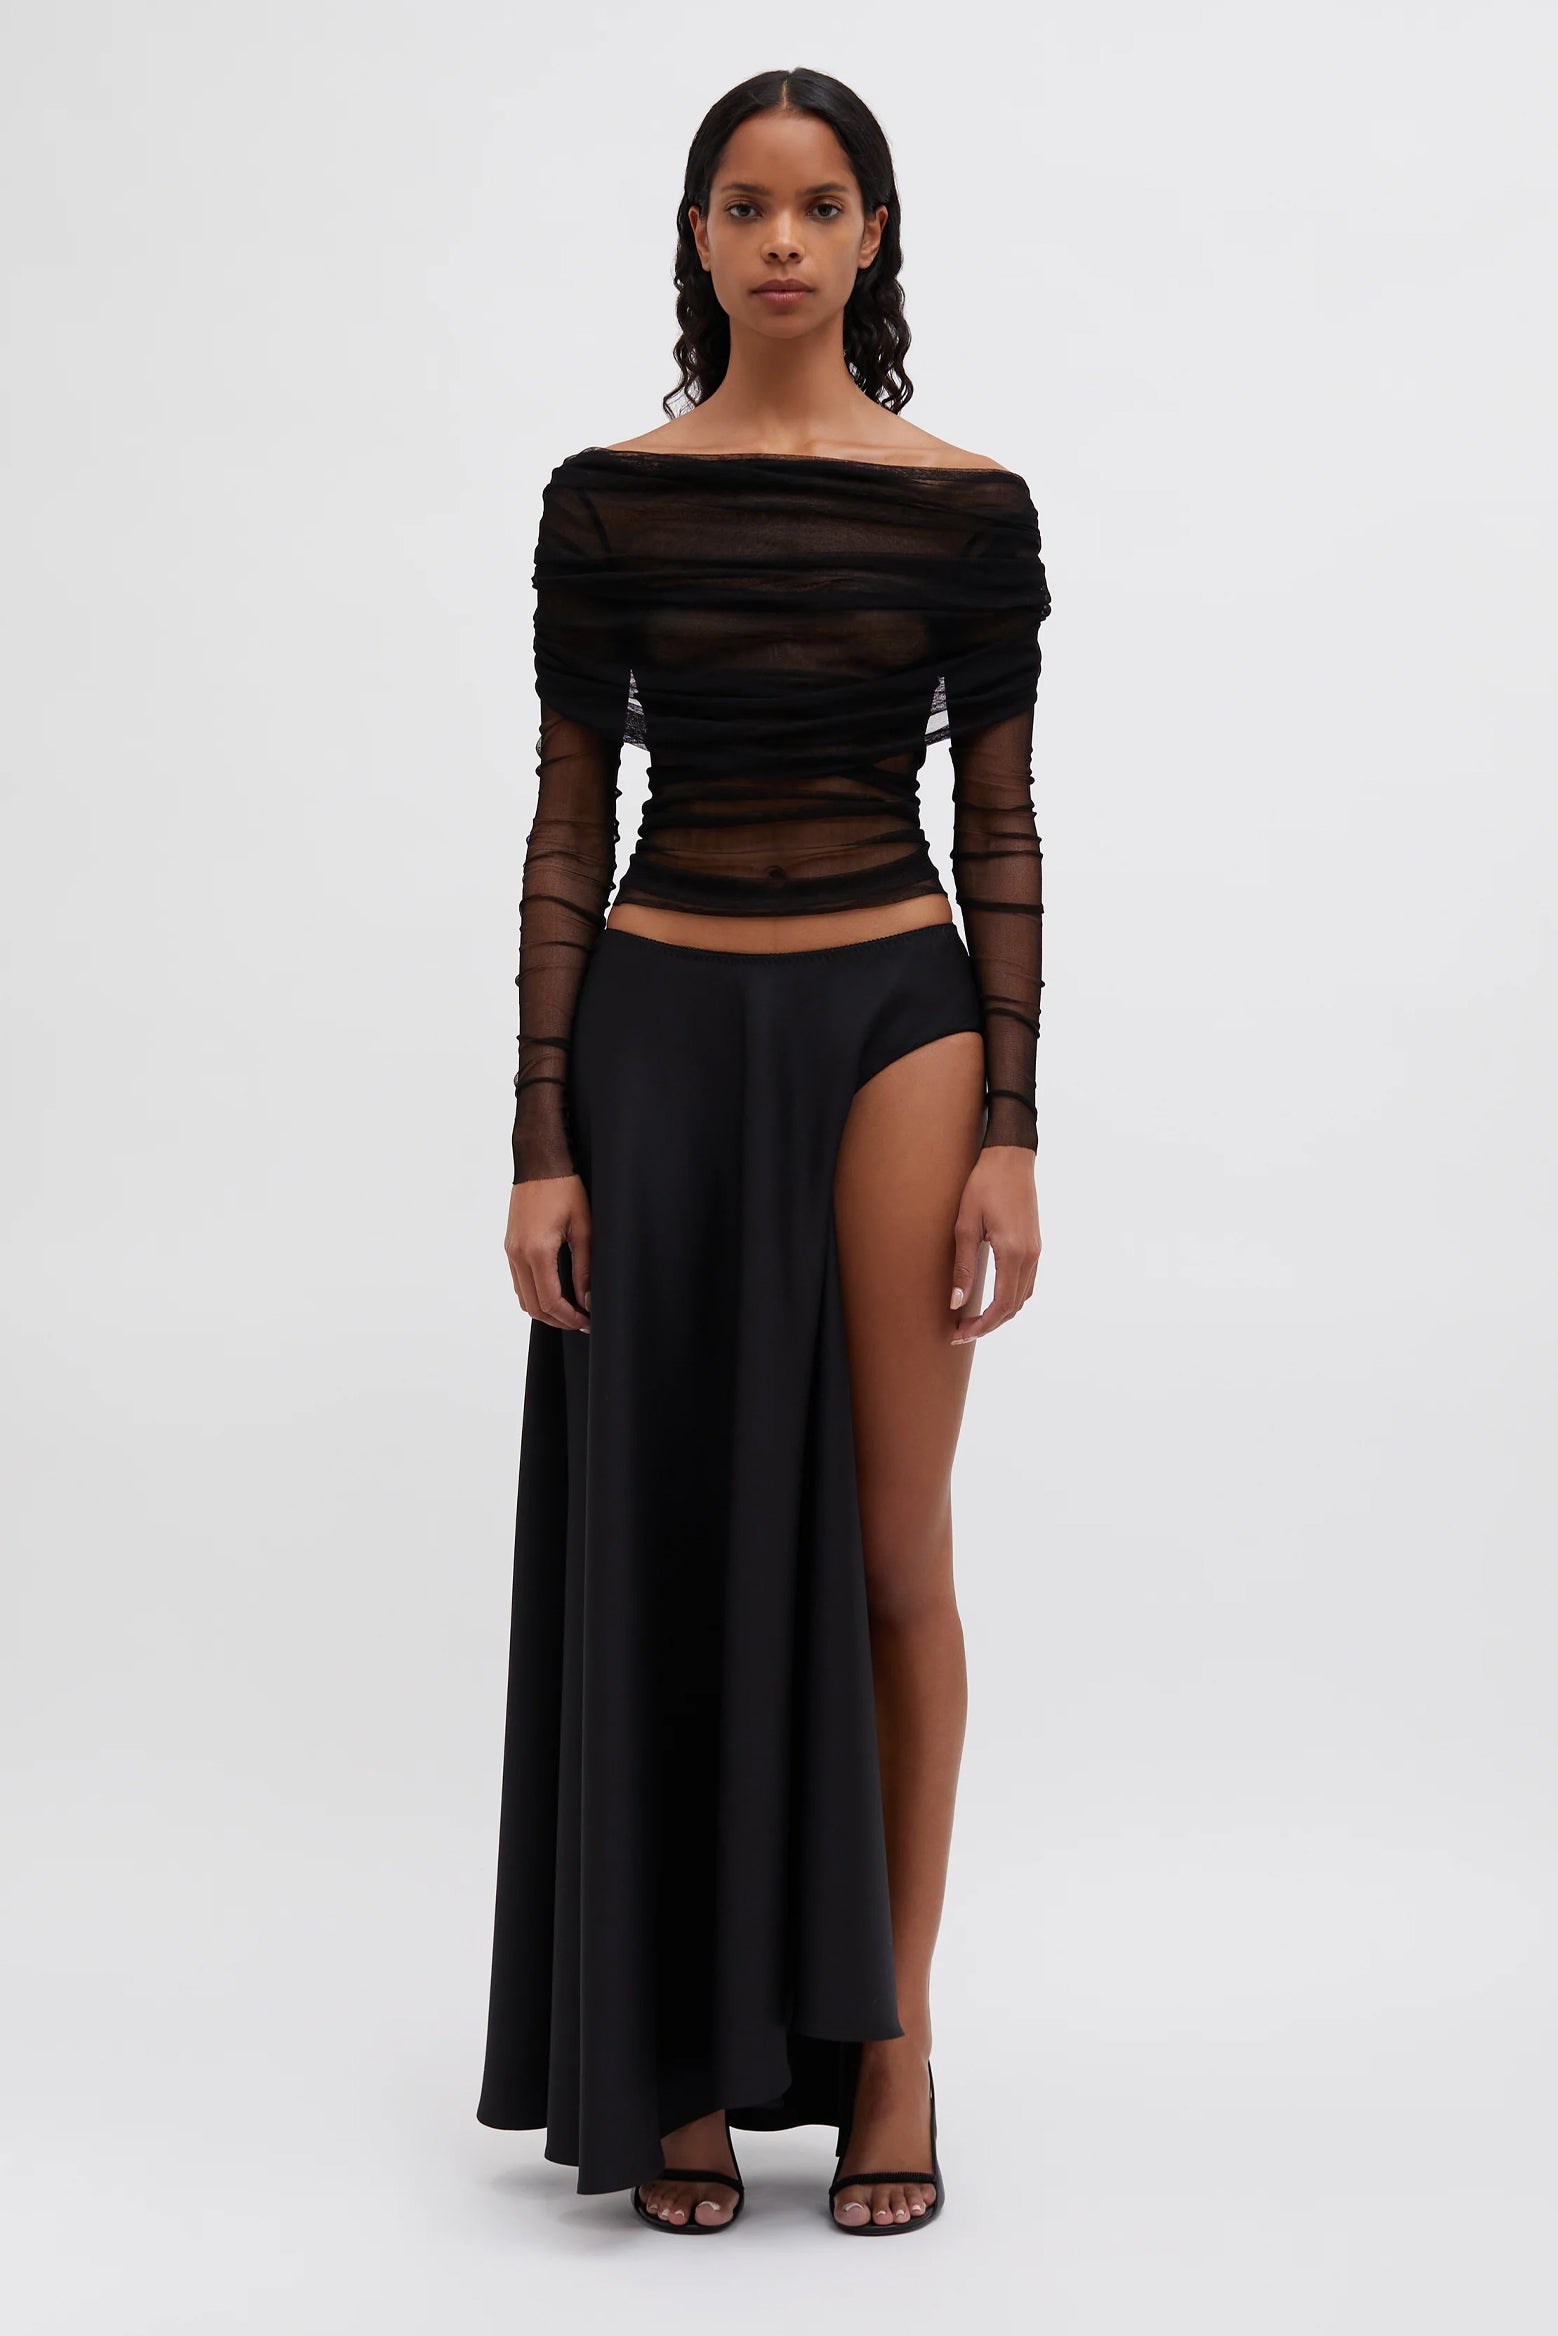 Christopher Esber Veiled Top in Black available at TNT The New Trend Australia